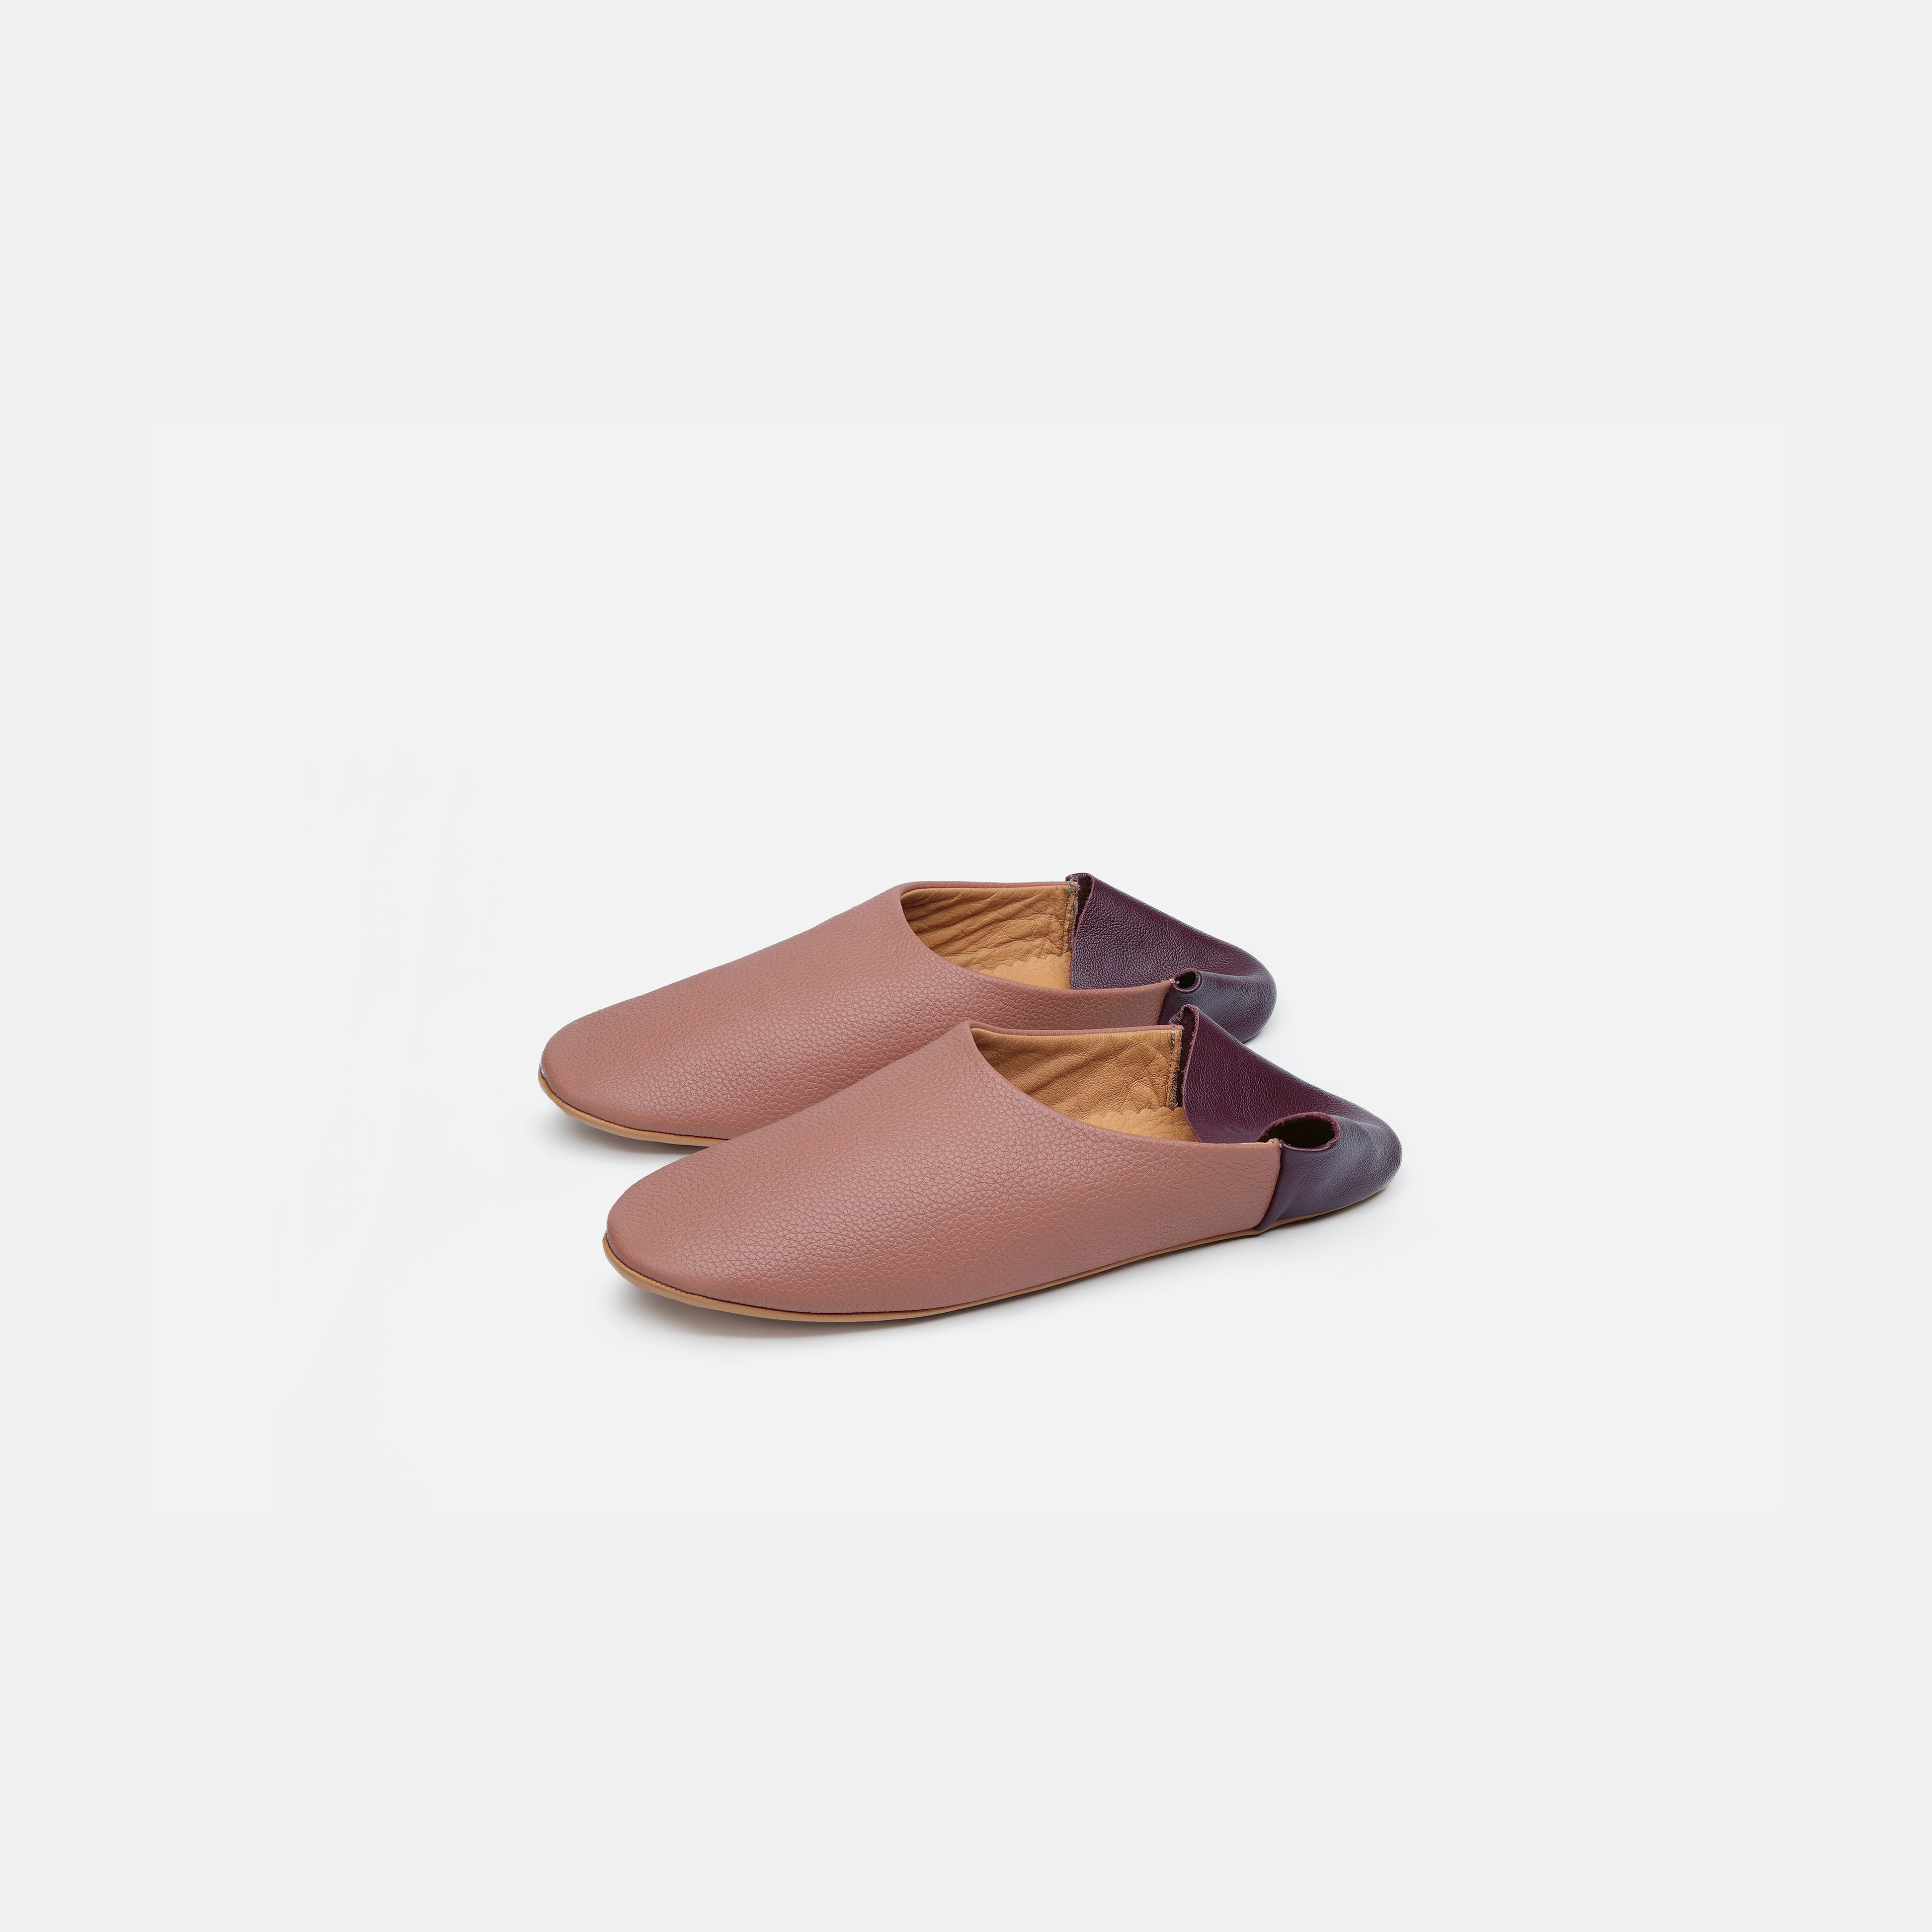 Dusty Pink & Aubergine Leather House Slippers